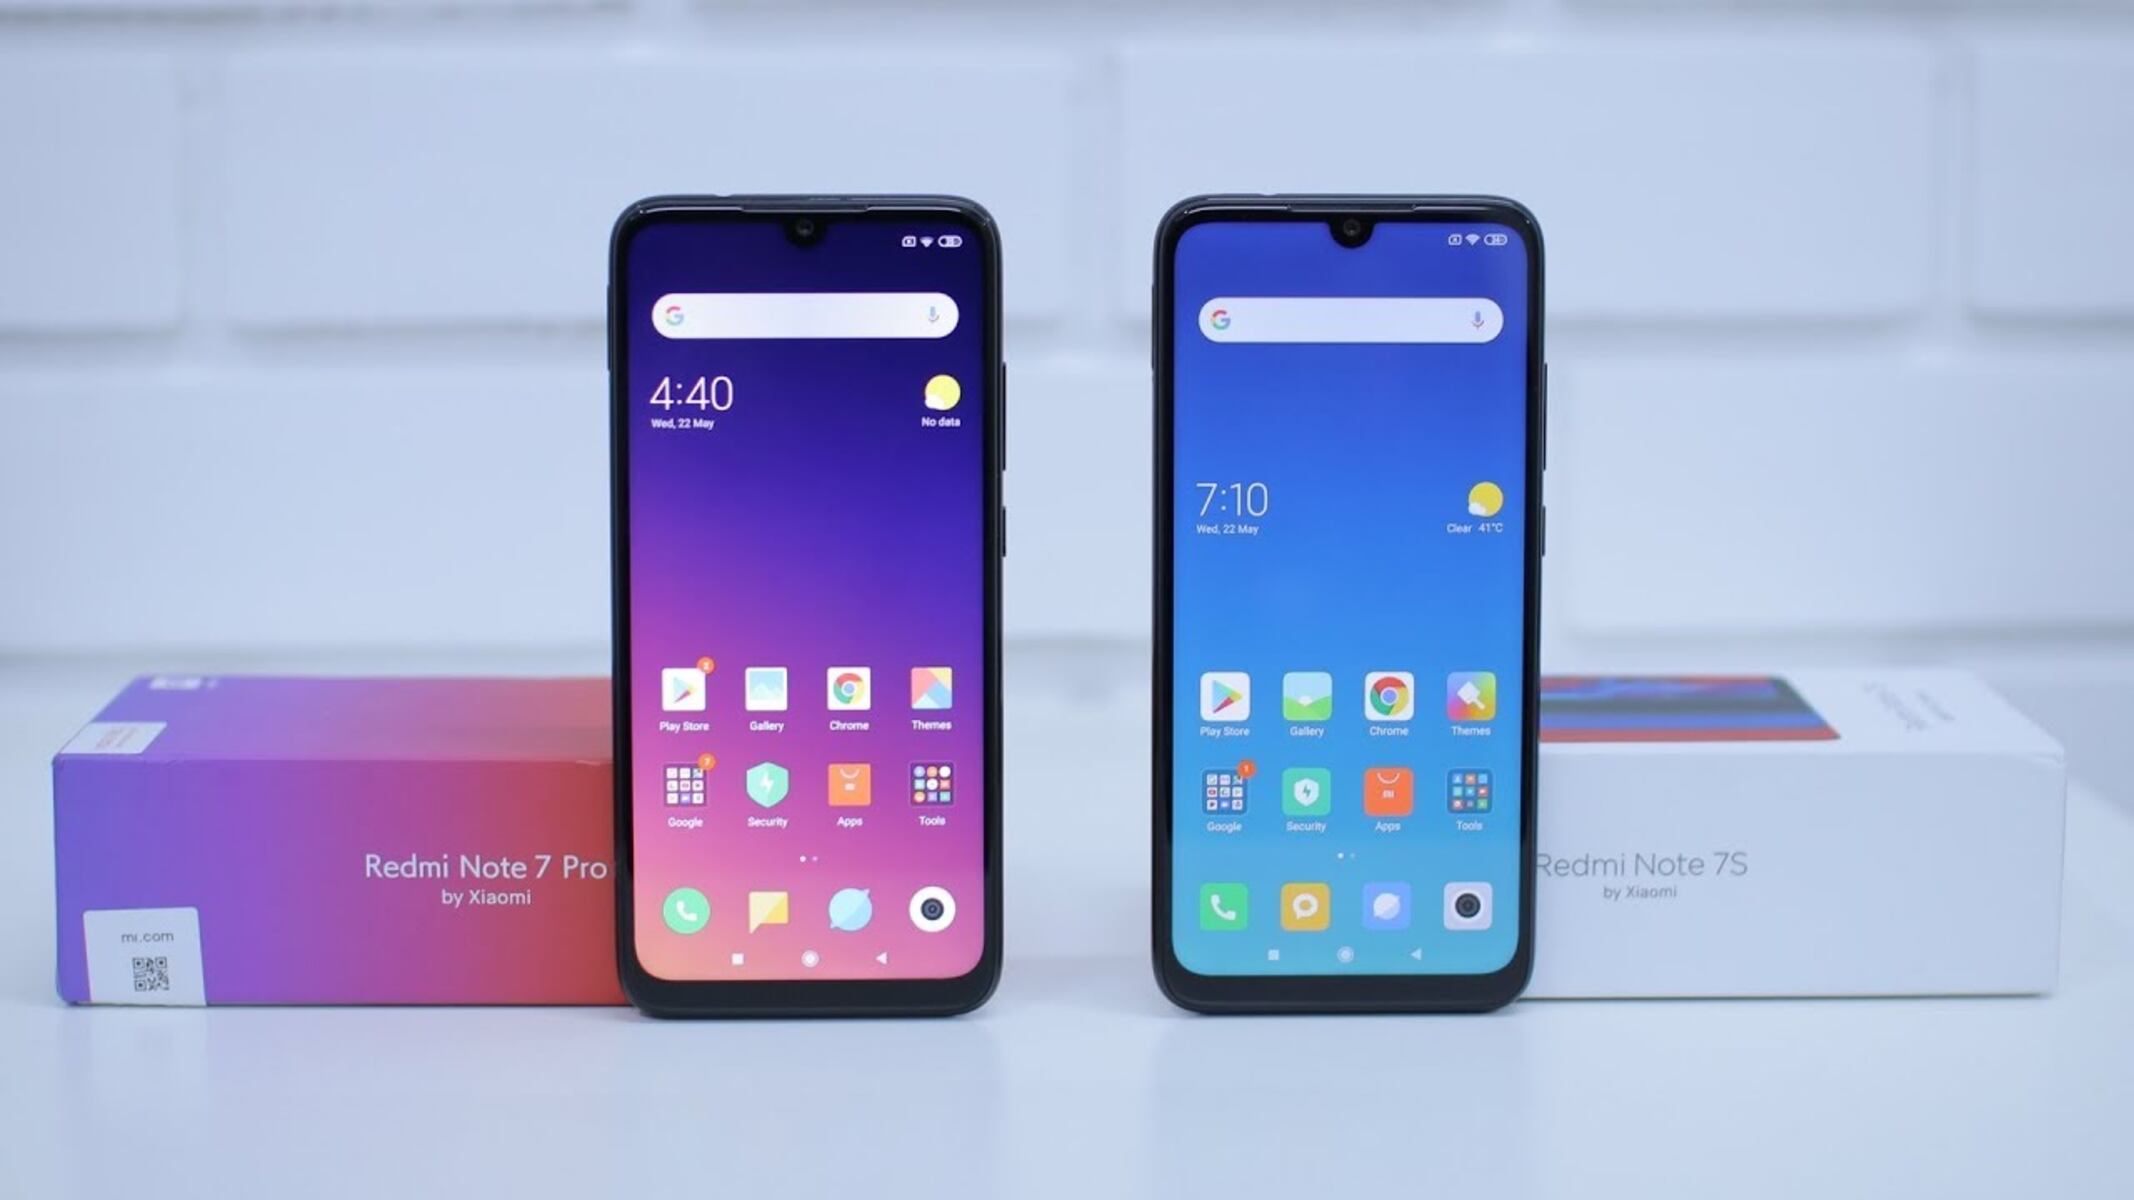 Redmi Note 7 Vs. Note 7 Pro: Which One To Choose?